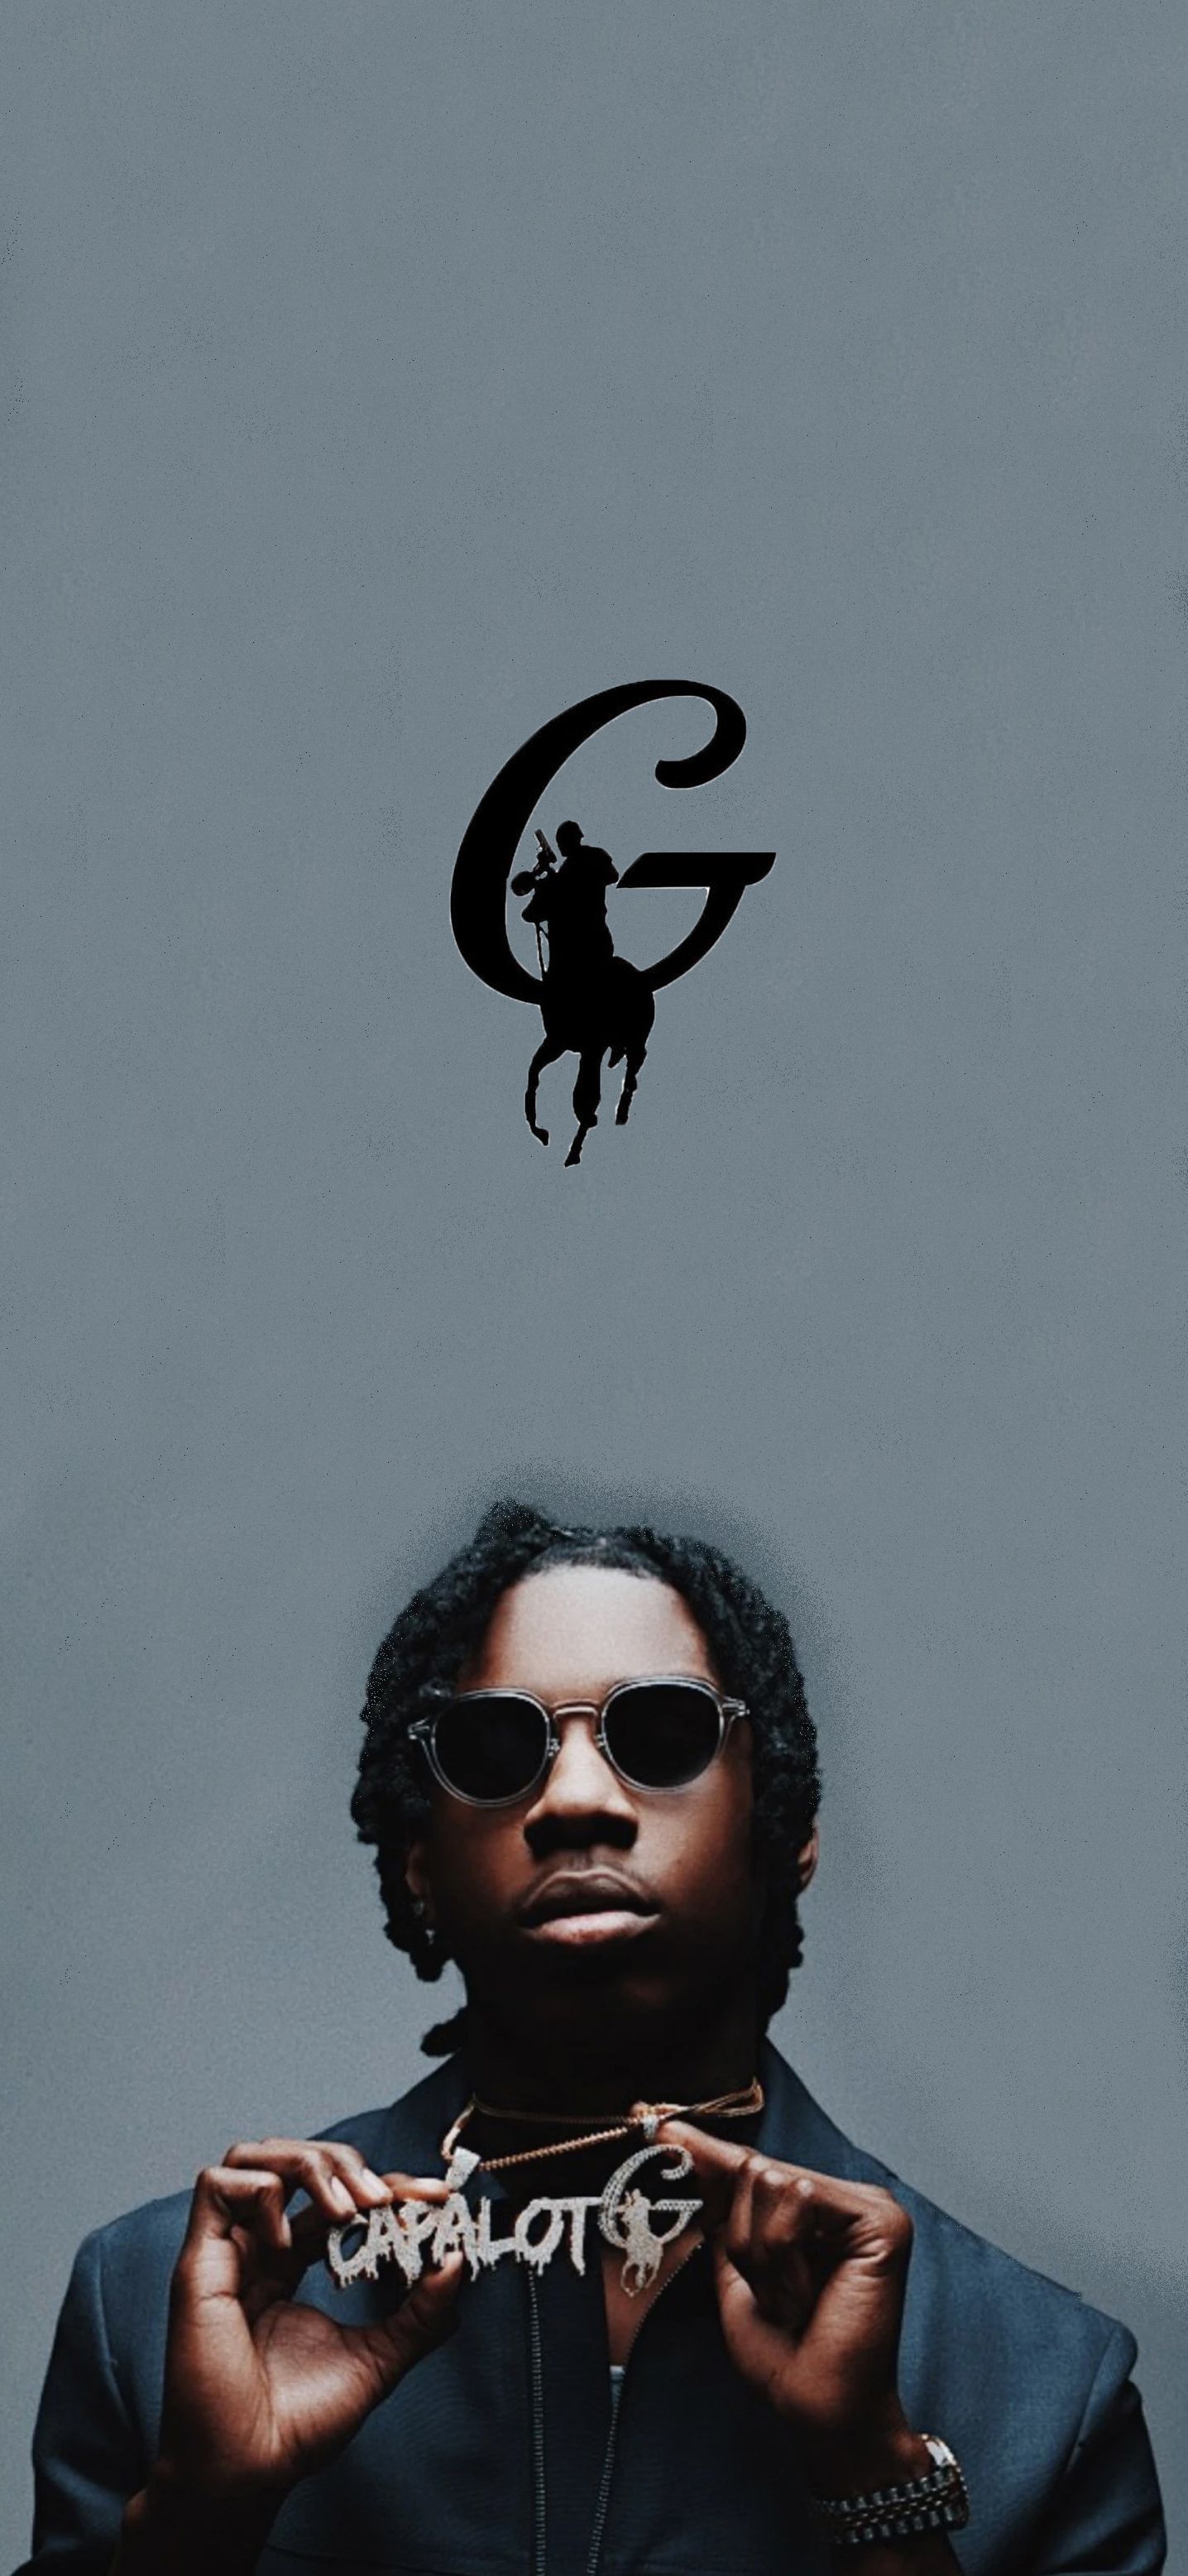 Polo G The Goat Wallpapers - Wallpaper Cave